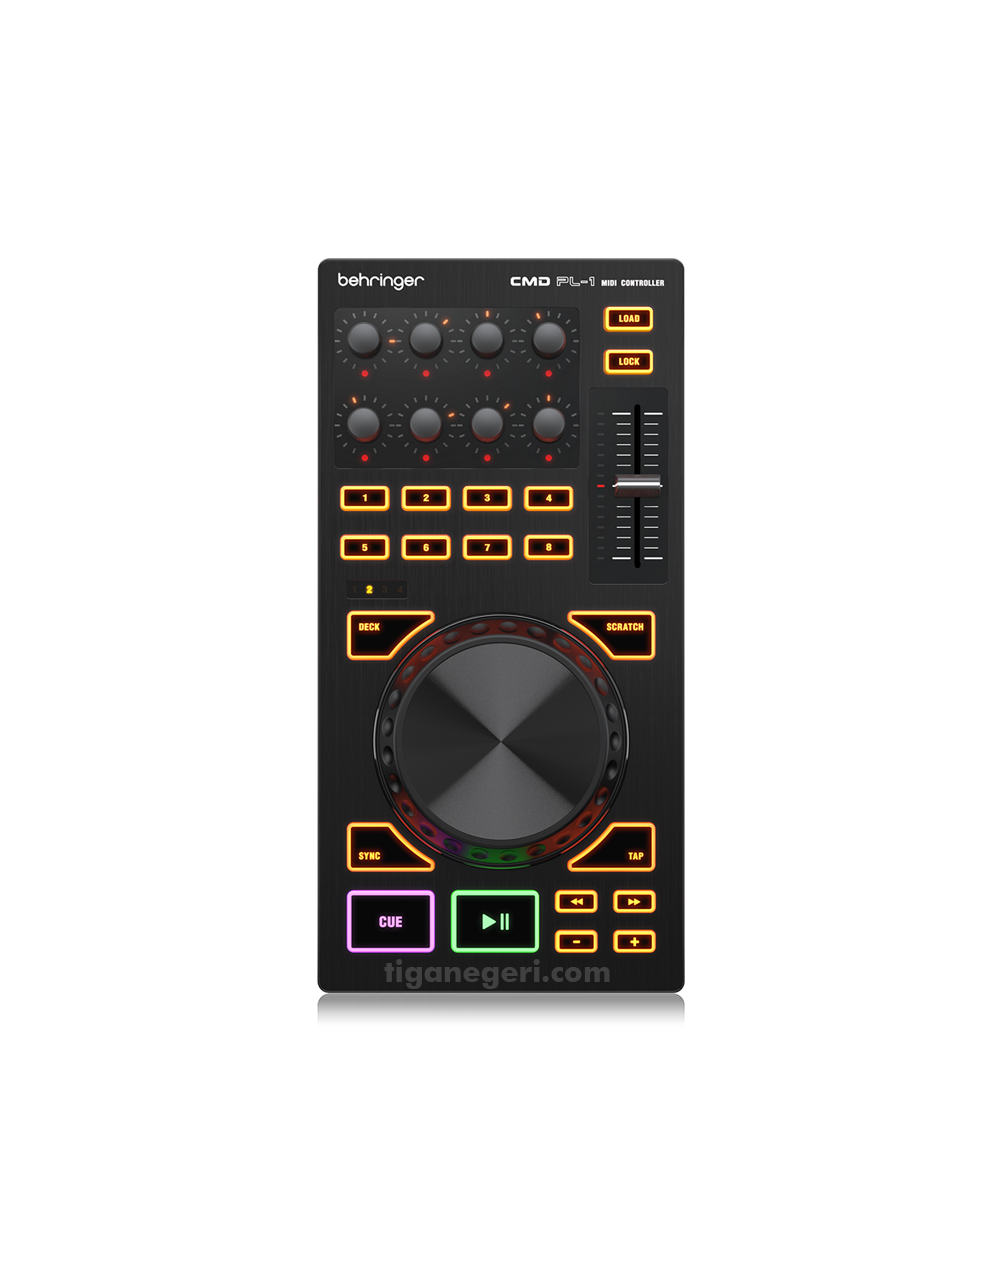 Black BEHRINGER CMD PL-1 Deck-Based Midi Module with 4 Touch-Sensitive Platter Deck Switching and Effects Control 